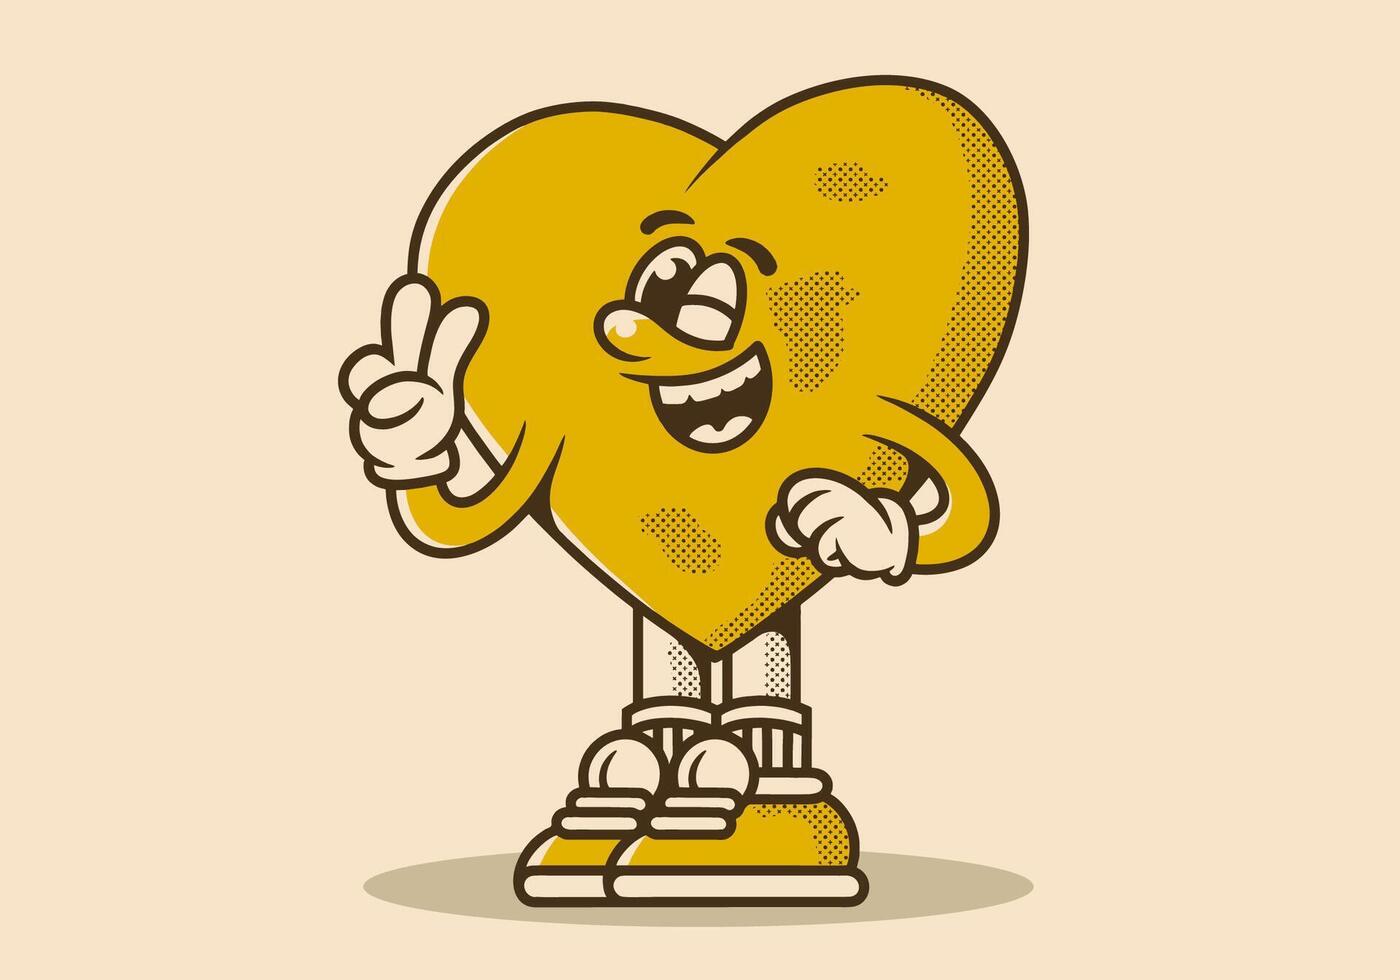 Character illustration of heart with hand form a symbol of peace. Yellow vintage color vector